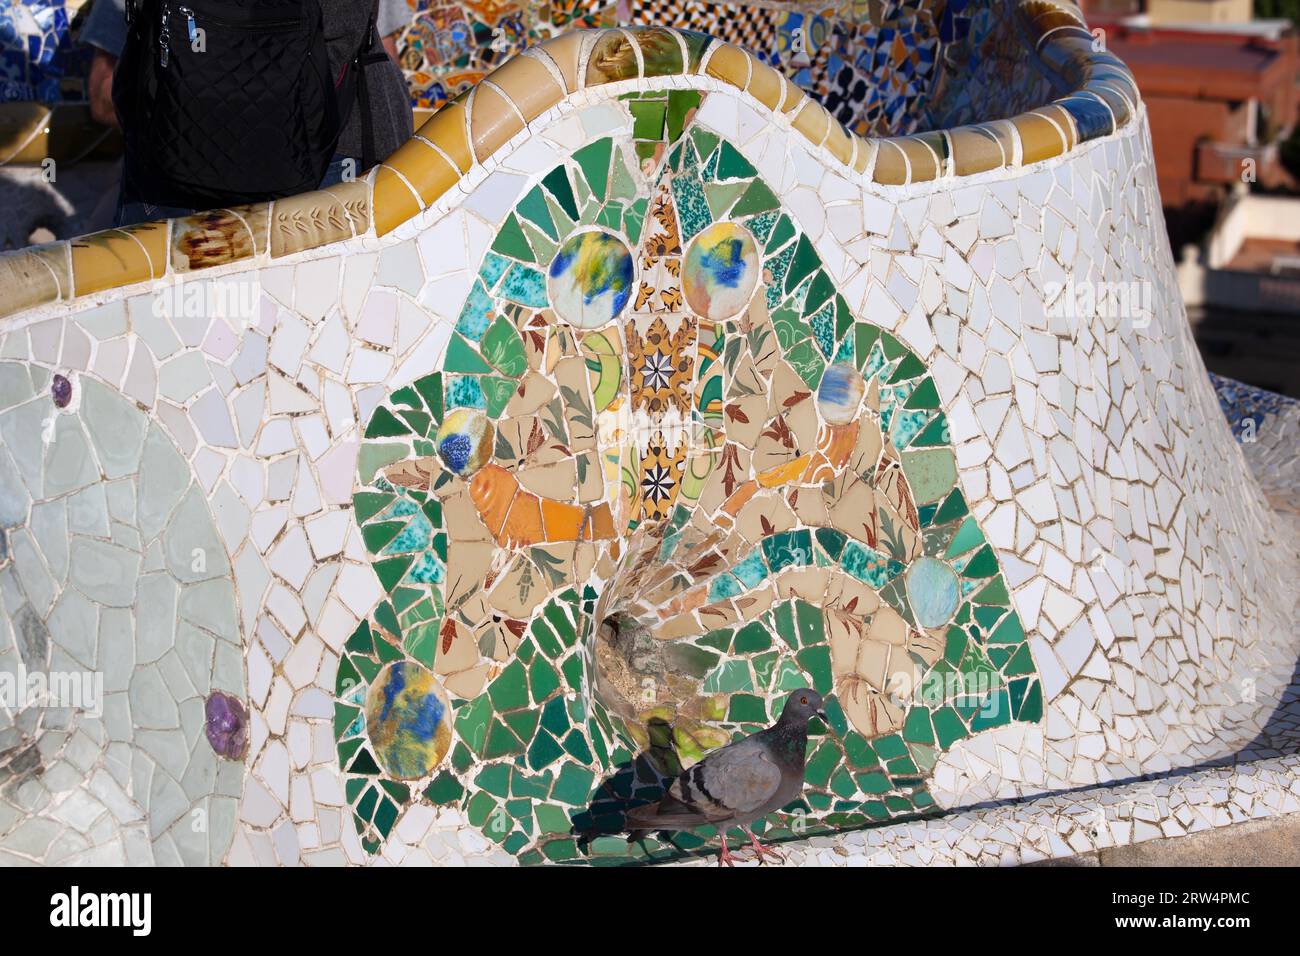 Trencadis broken tile shards abstract mosaic, part of Serpentine Bench at Gaudi's Park Guell in Barcelona, Catalonia, Spain Stock Photo